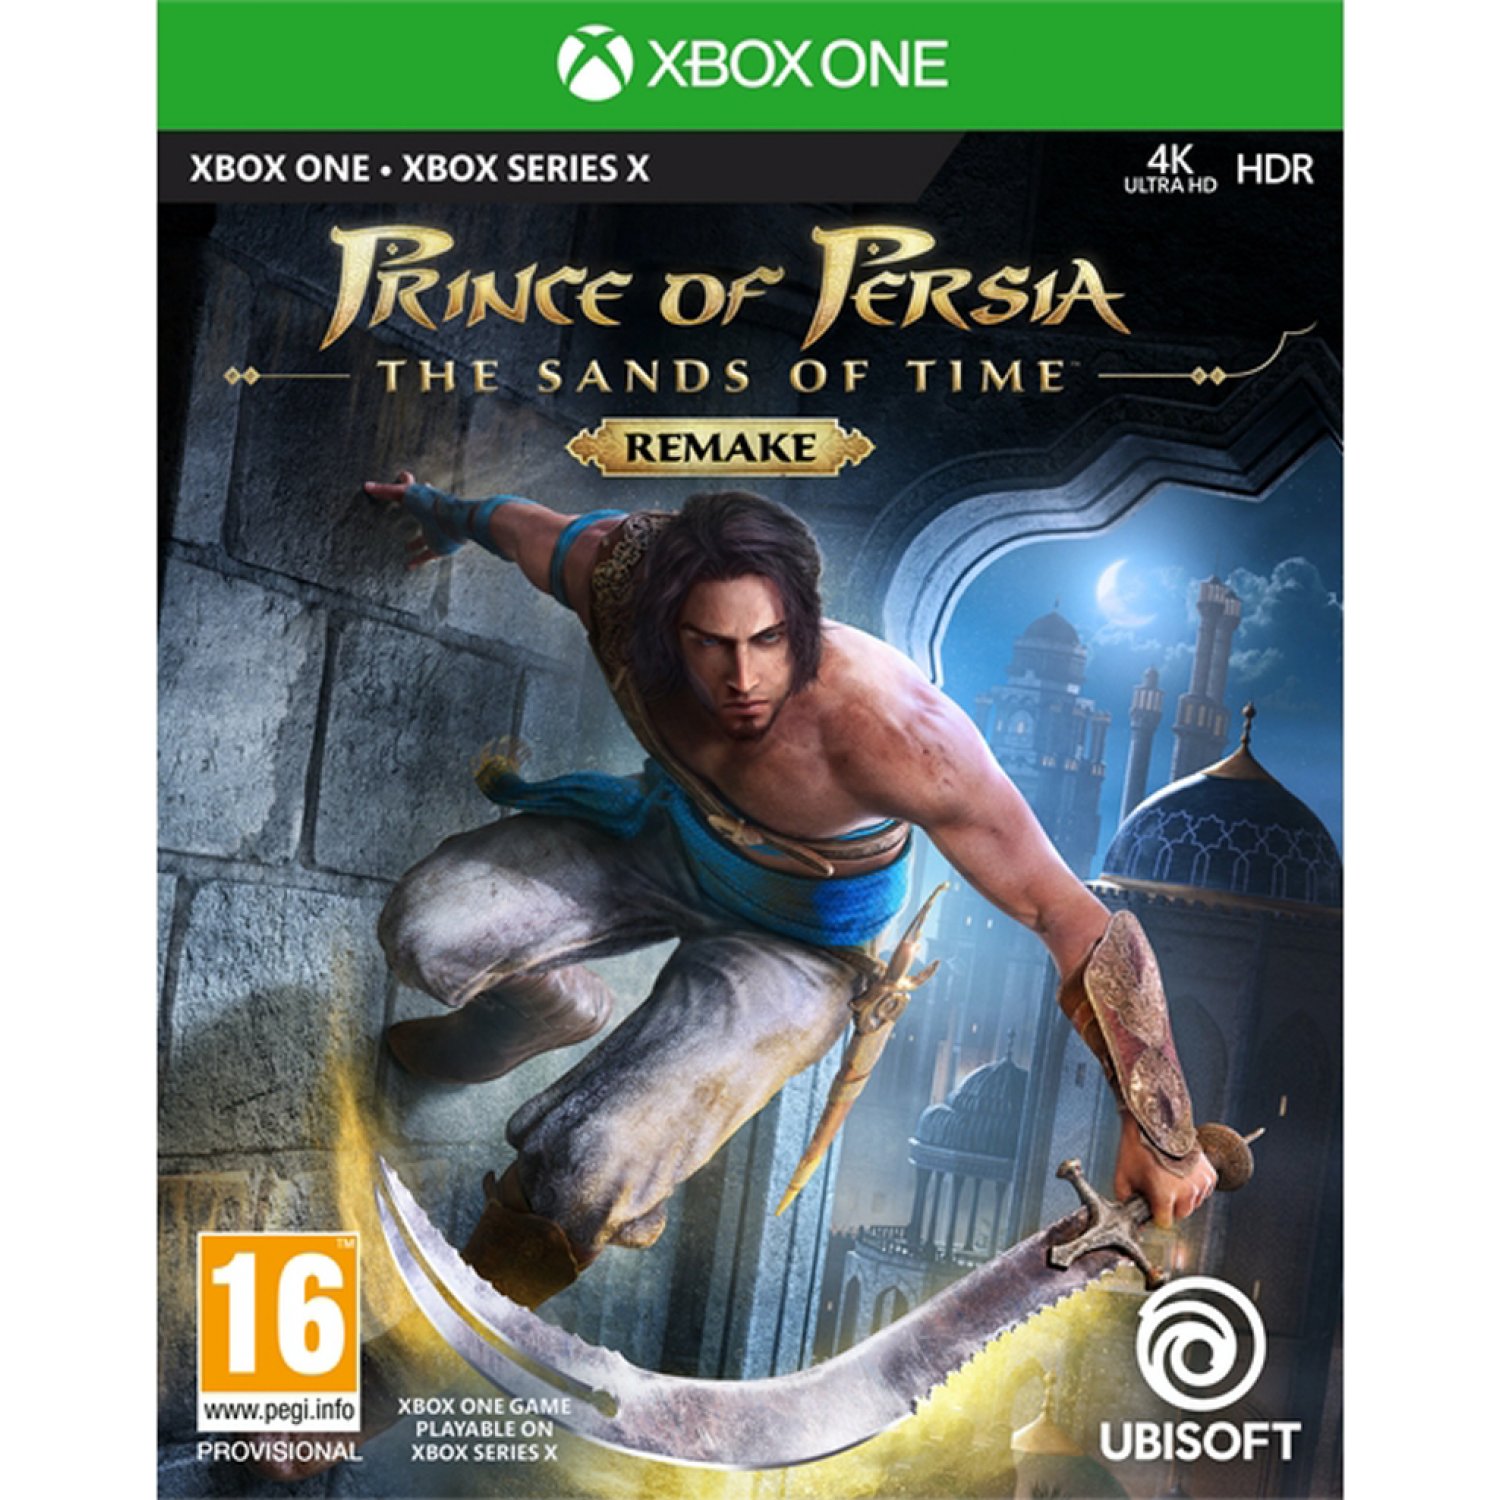 Prince of Persia The Sands of Time Remake - Xbox One Játékok